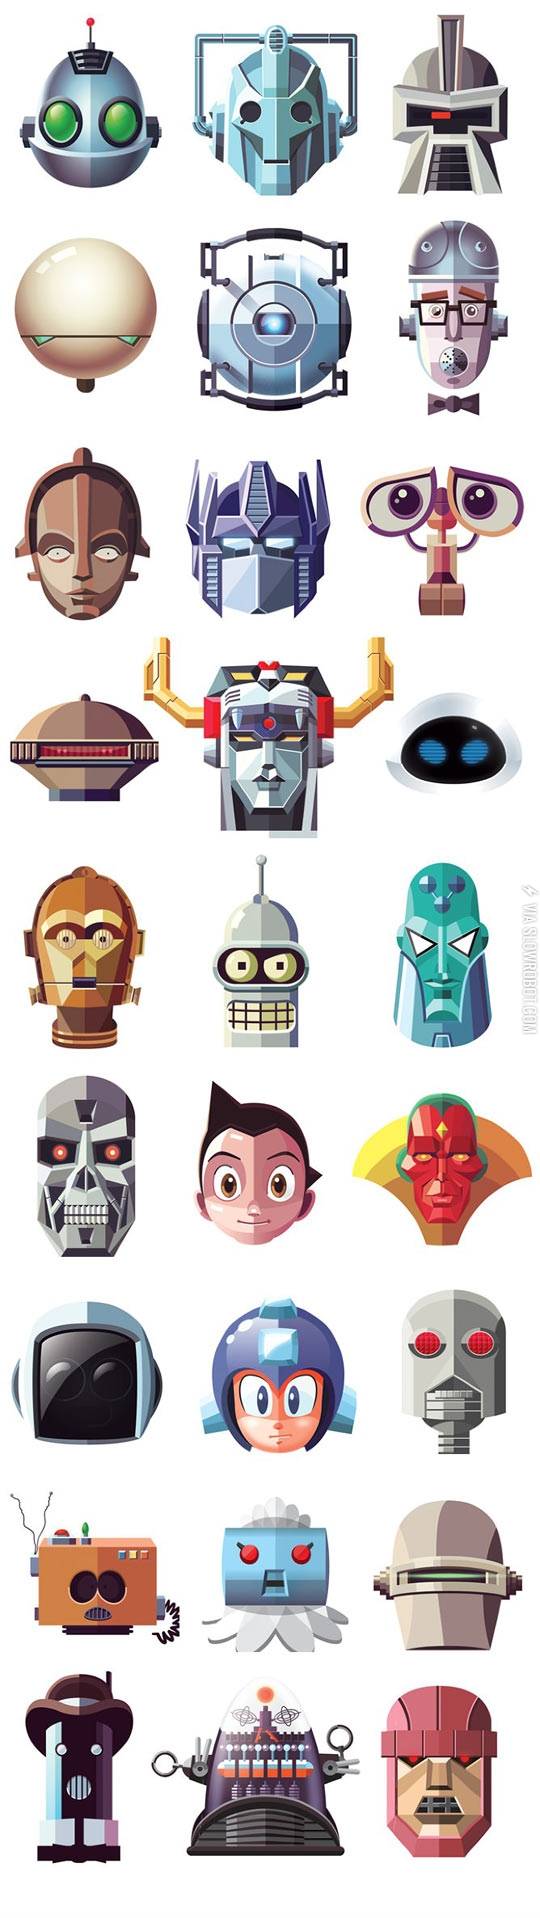 All+the+robots.